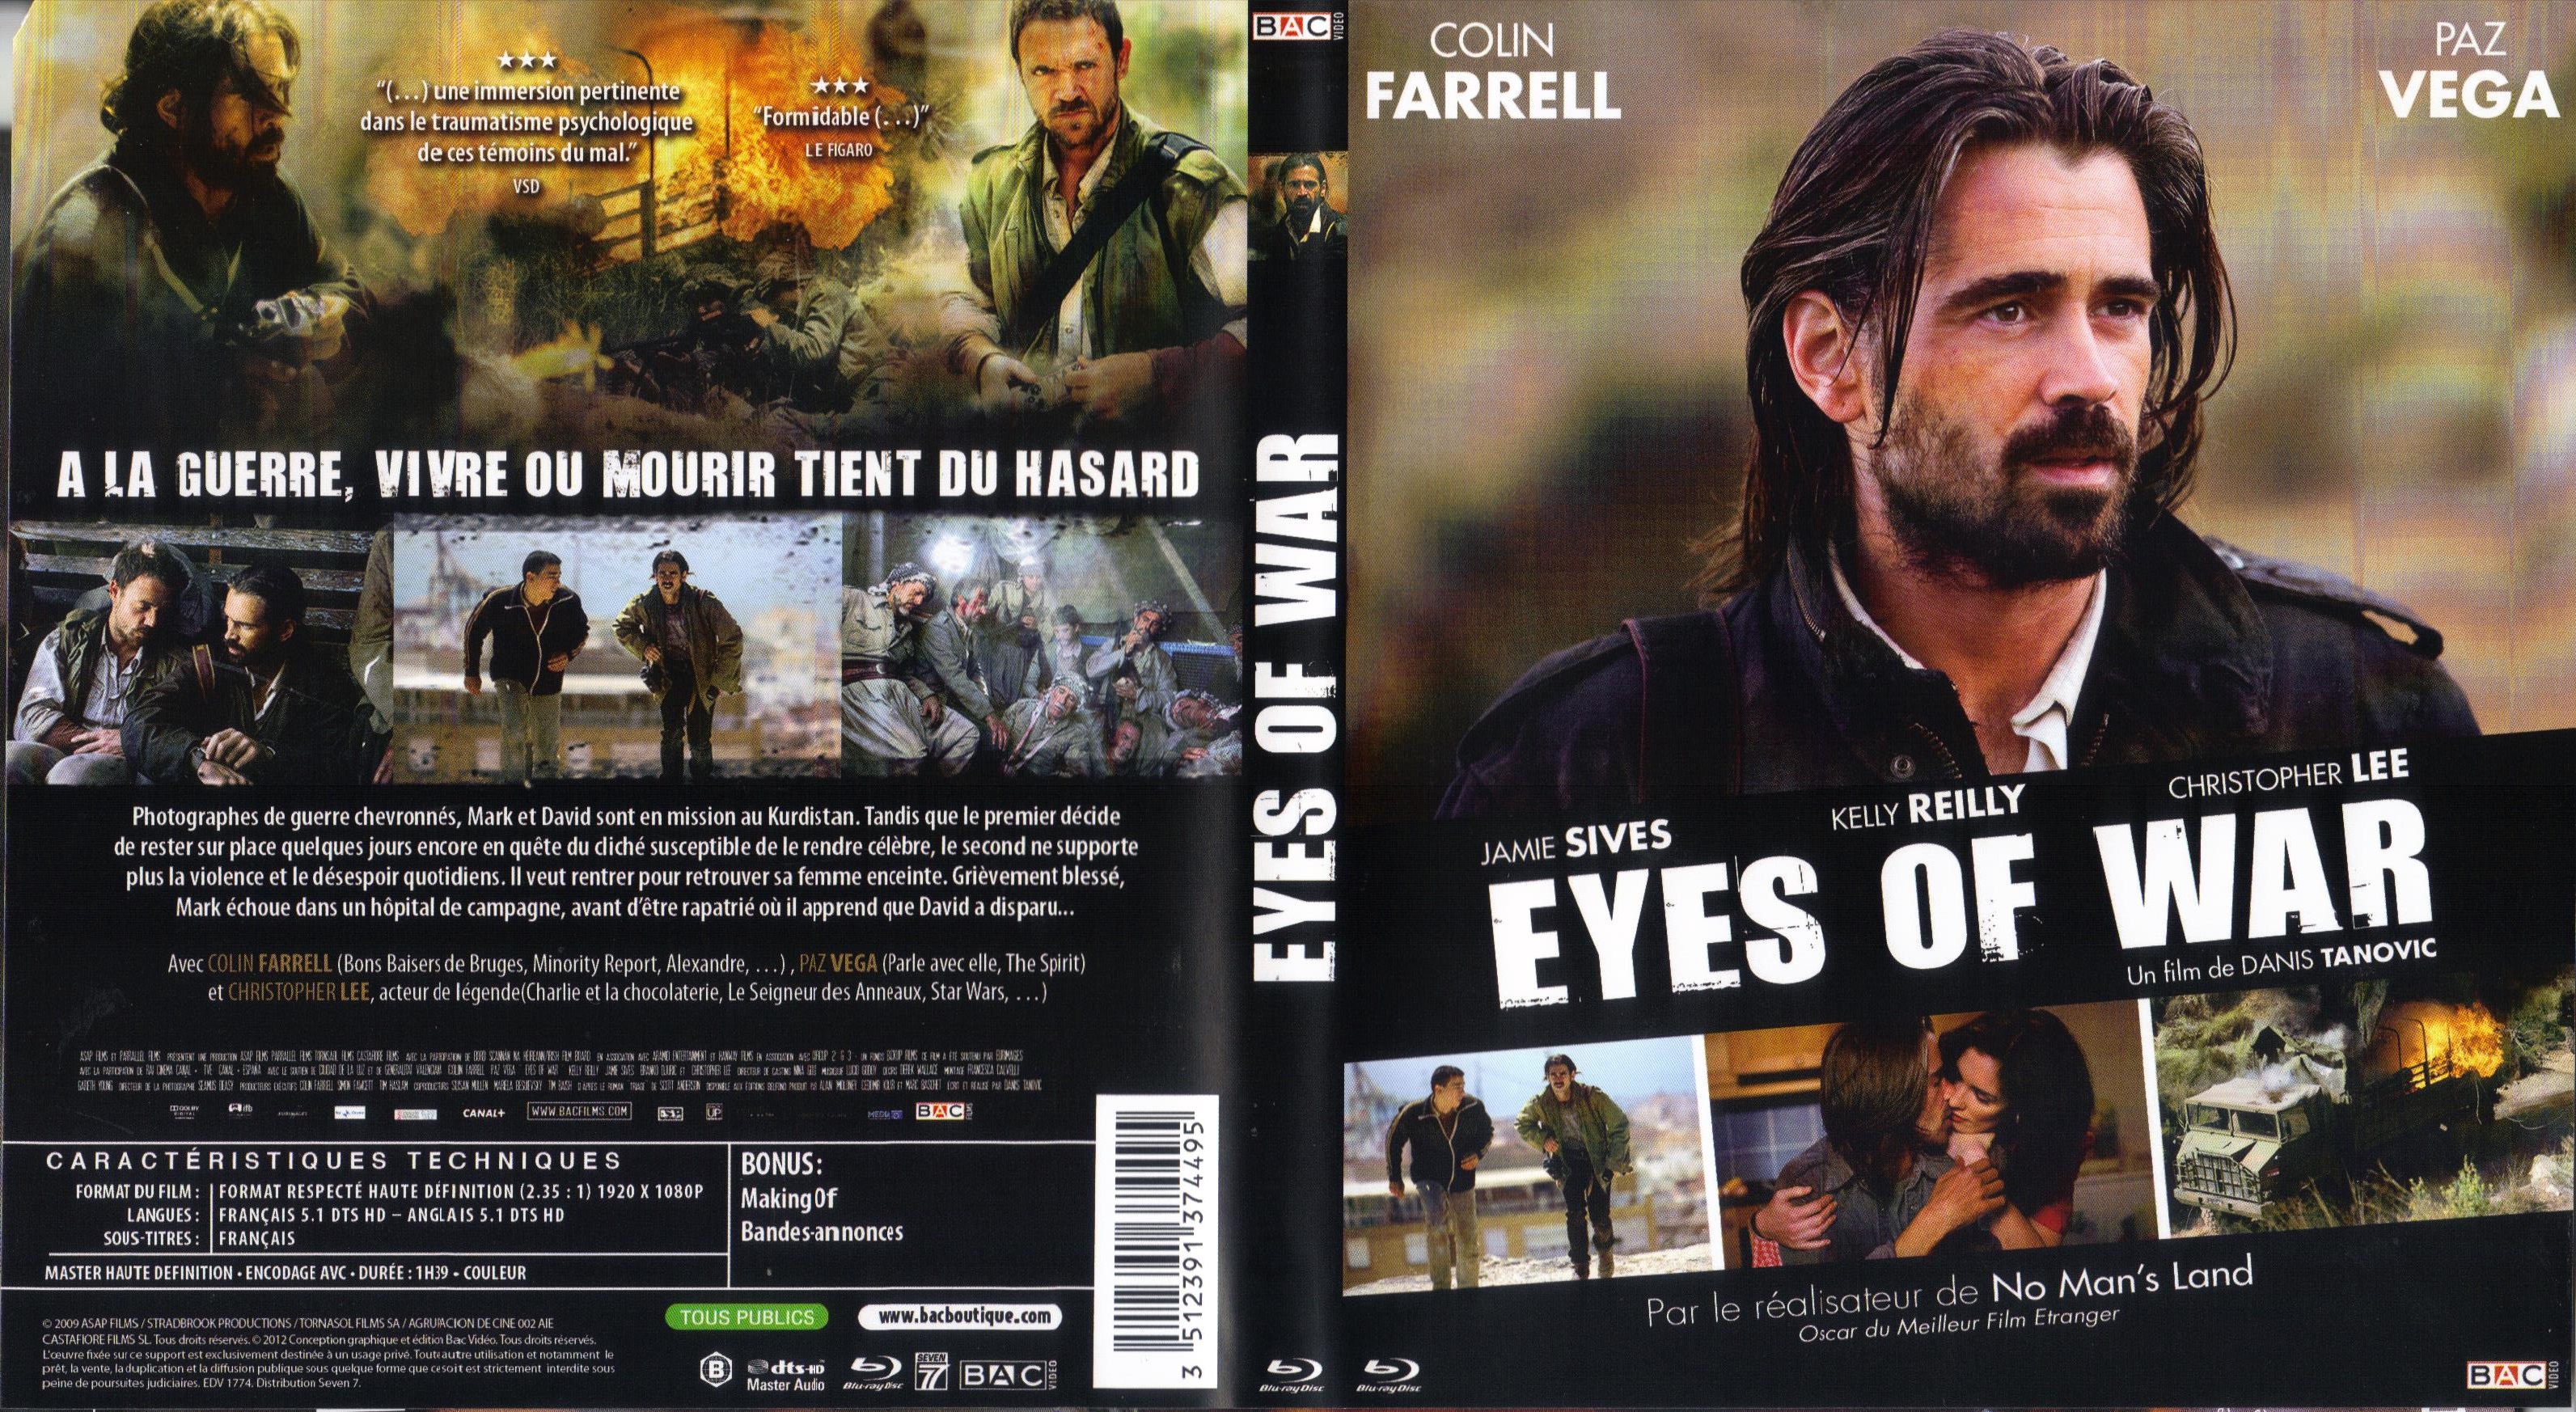 Jaquette DVD Eyes of War (BLU-RAY)